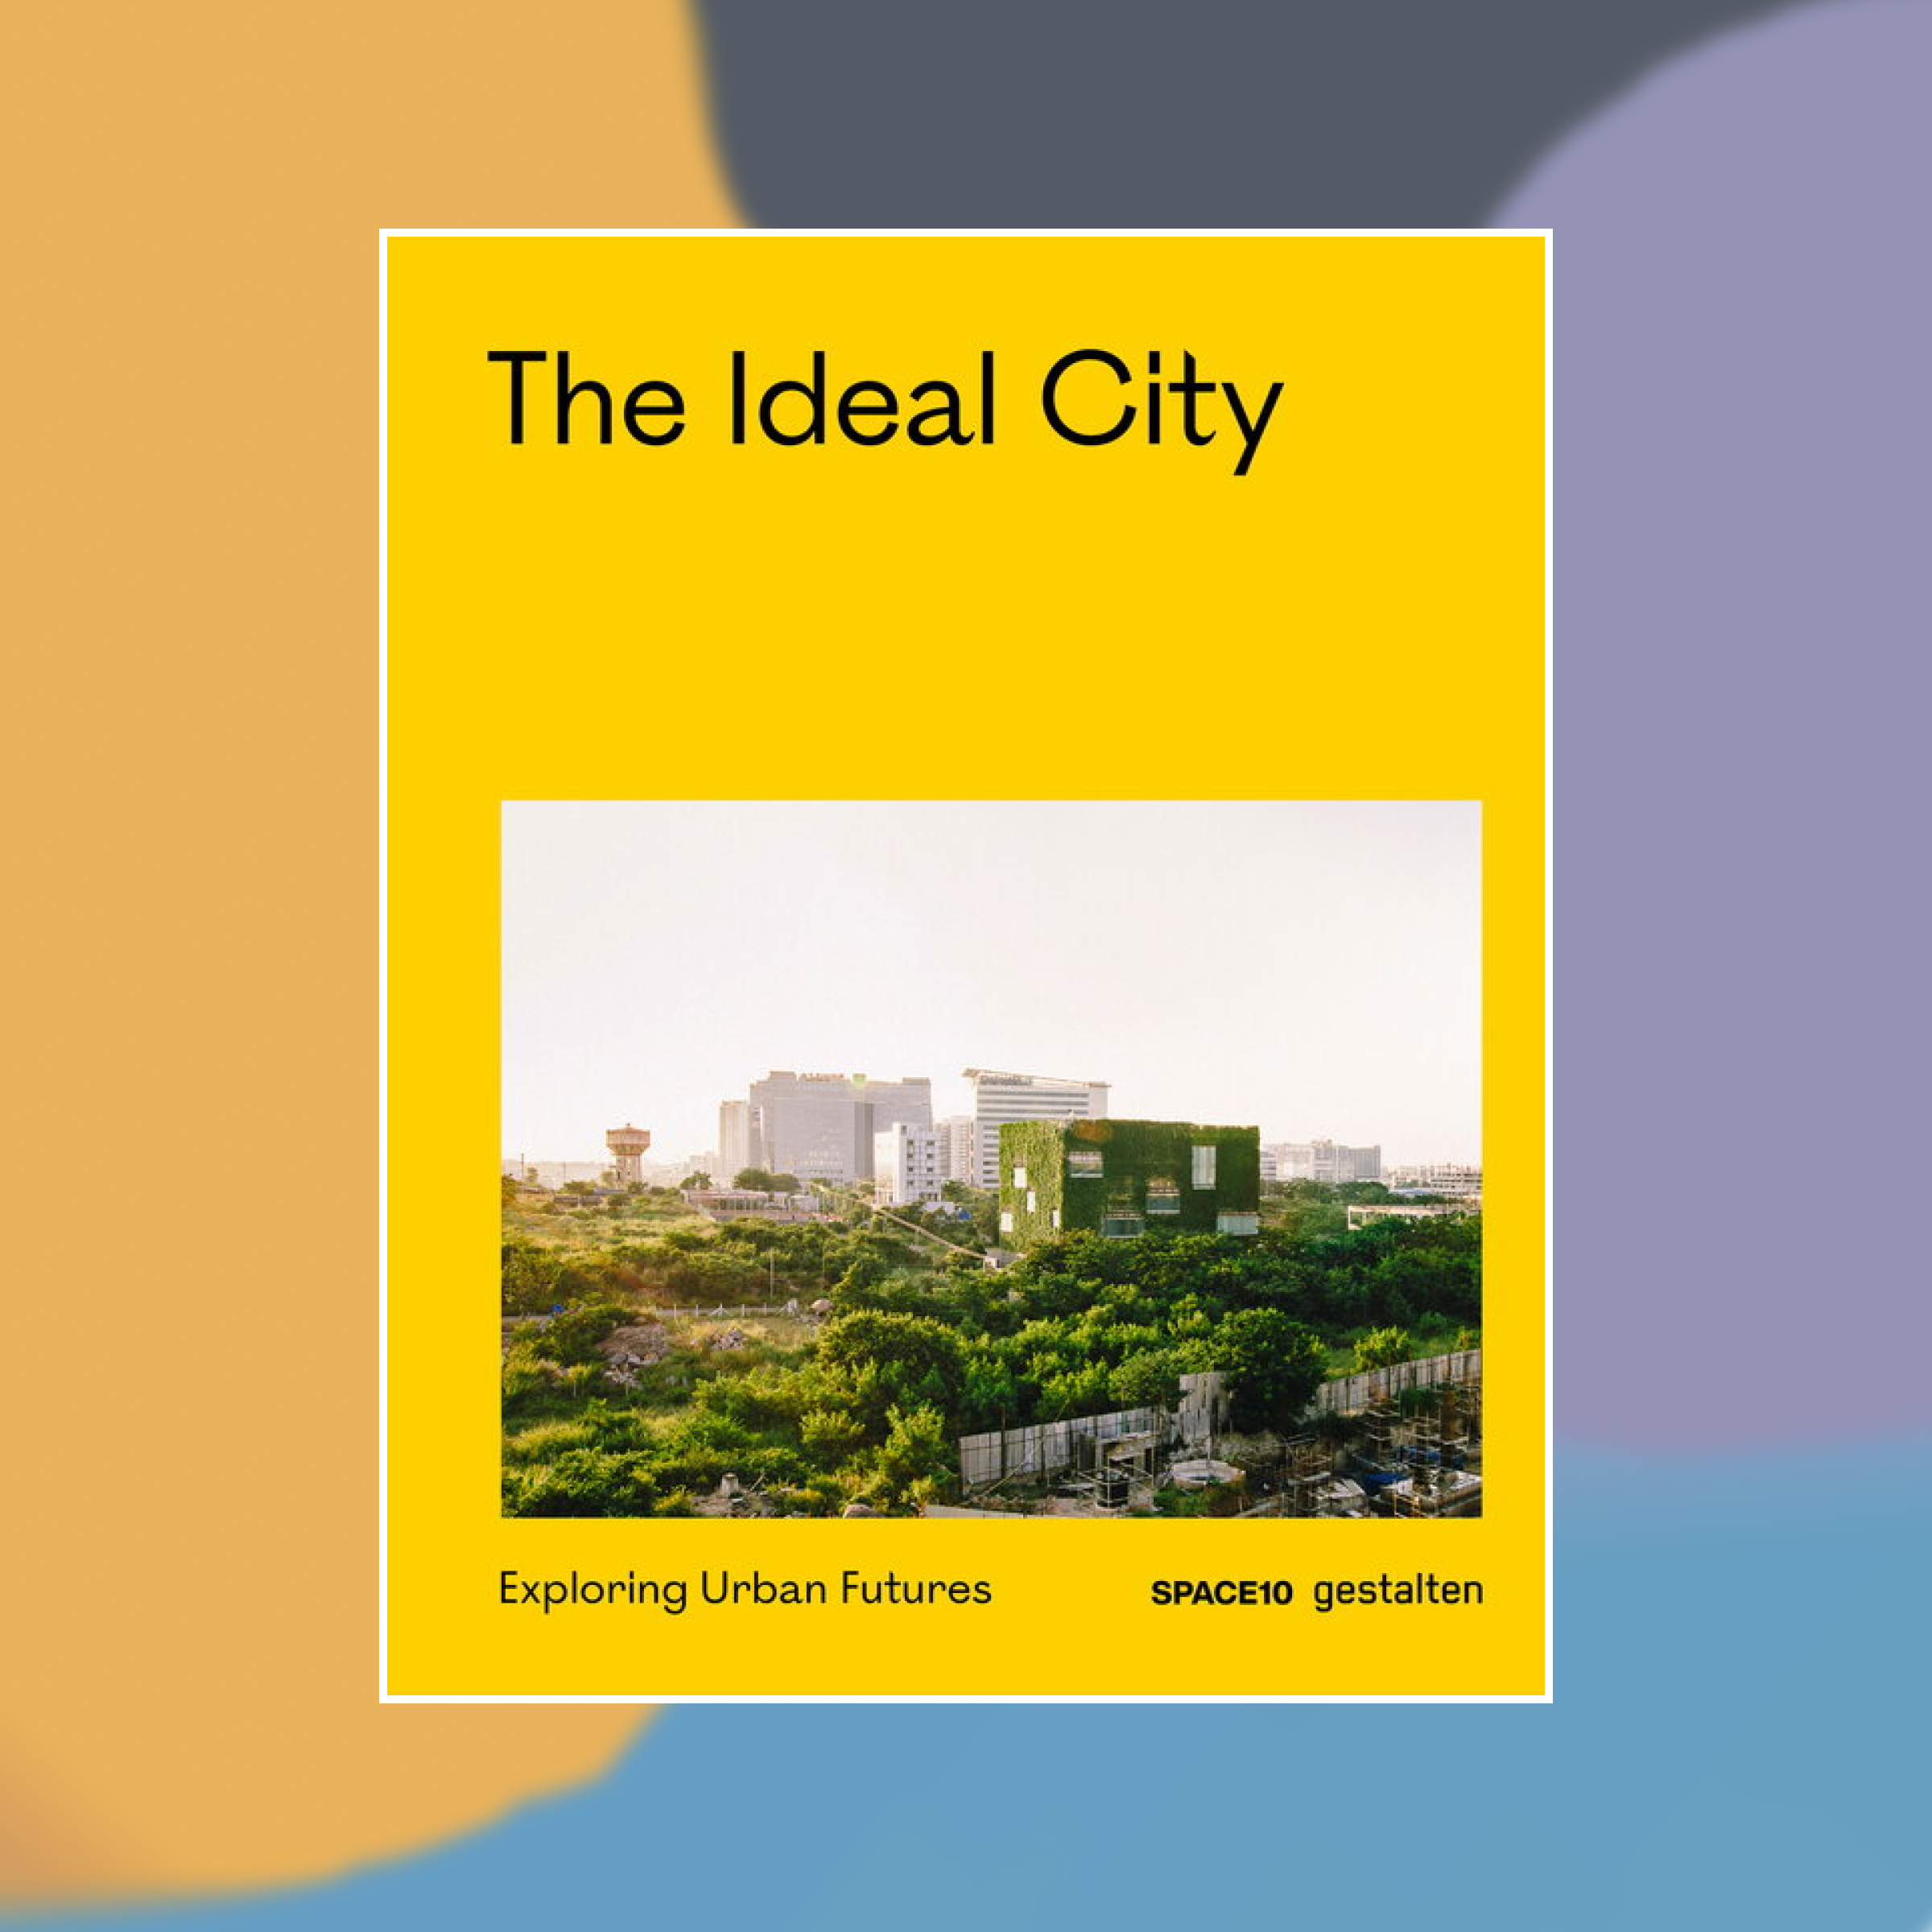 Book cover of The Ideal City against a painted background